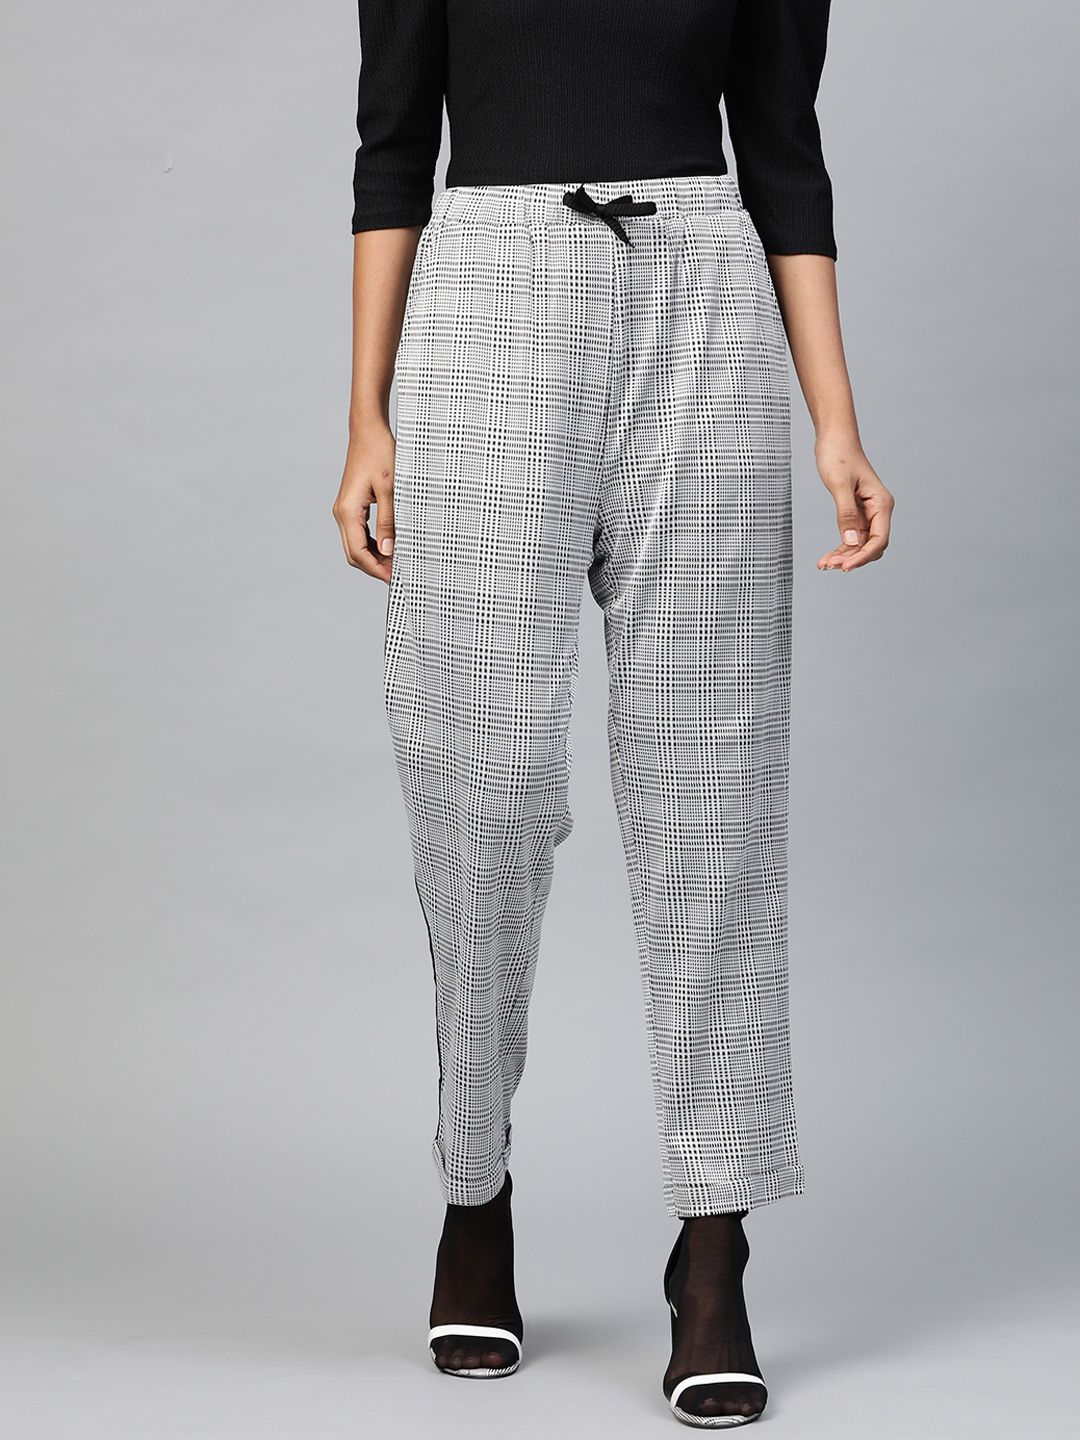 SASSAFRAS Women White & Black Regular Fit Self-Checked Cropped Trousers Price in India